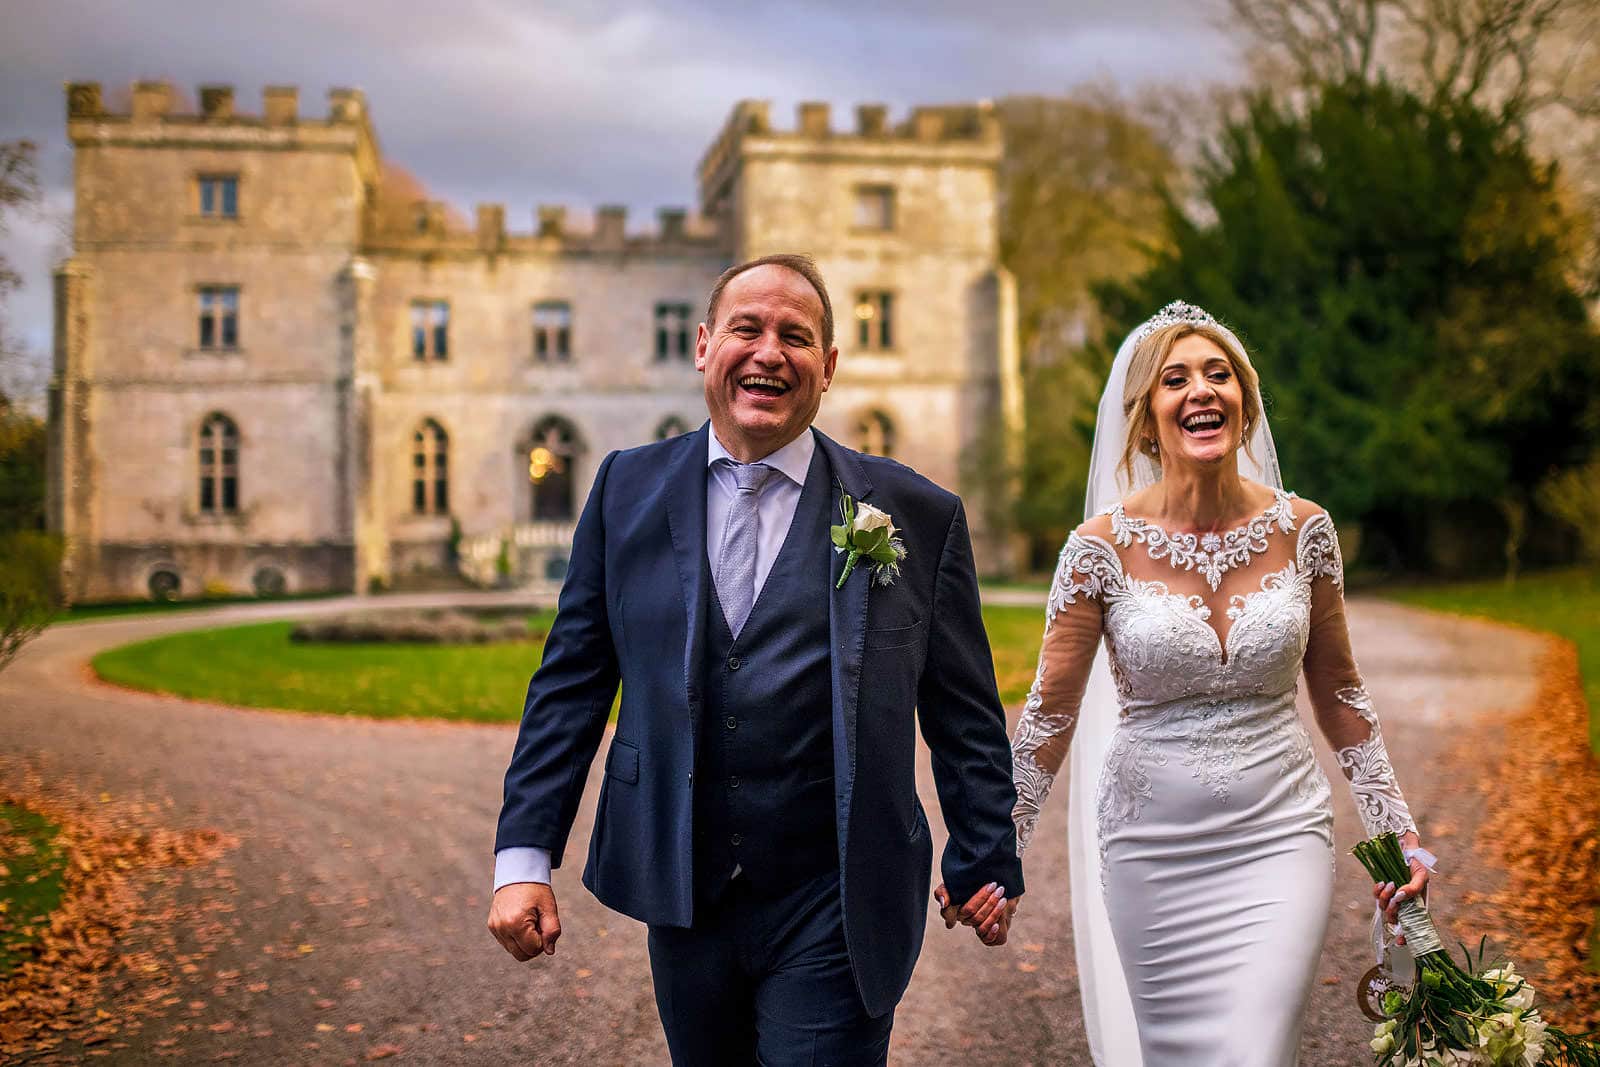 Wedding photography at Clearwell Castle